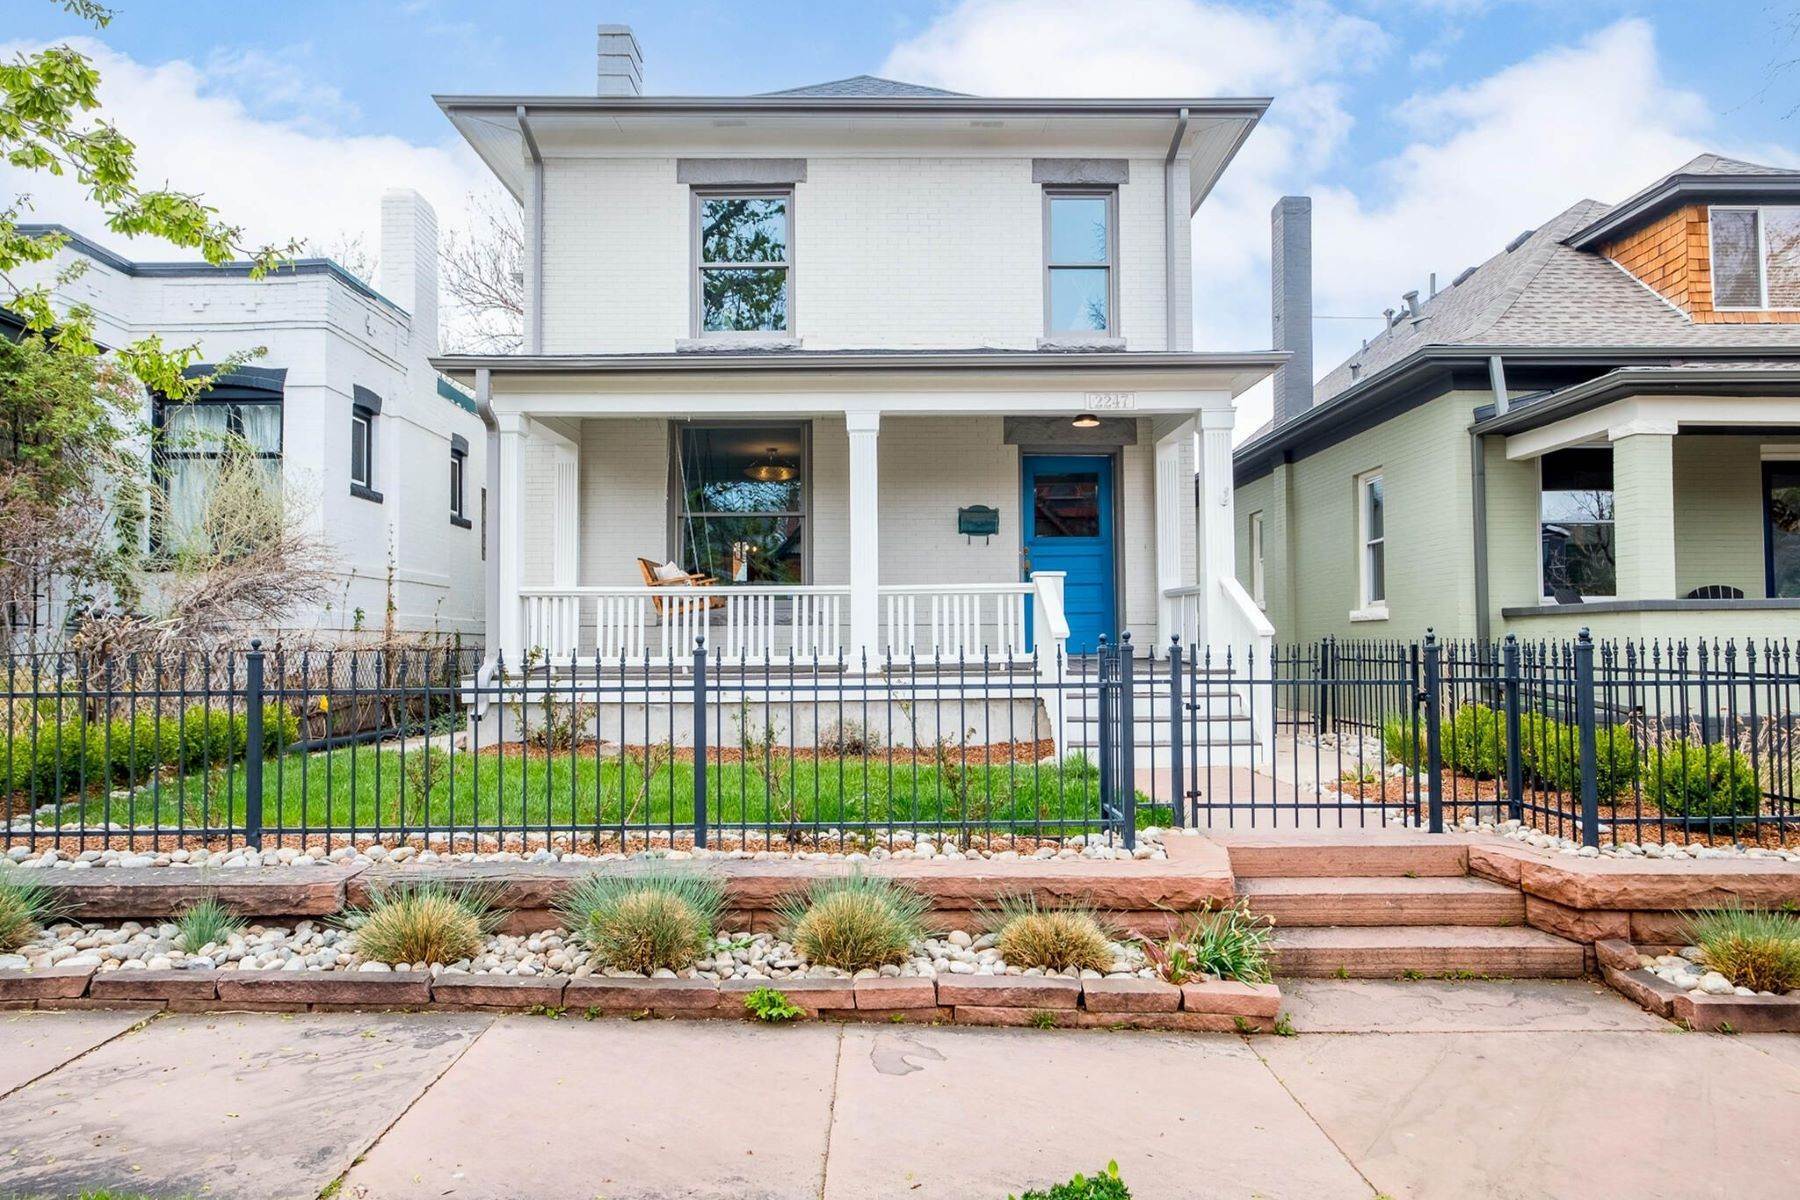 Single Family Homes for Active at Updated Denver Square LoHi 2247 W 34th Avenue Denver, Colorado 80211 United States